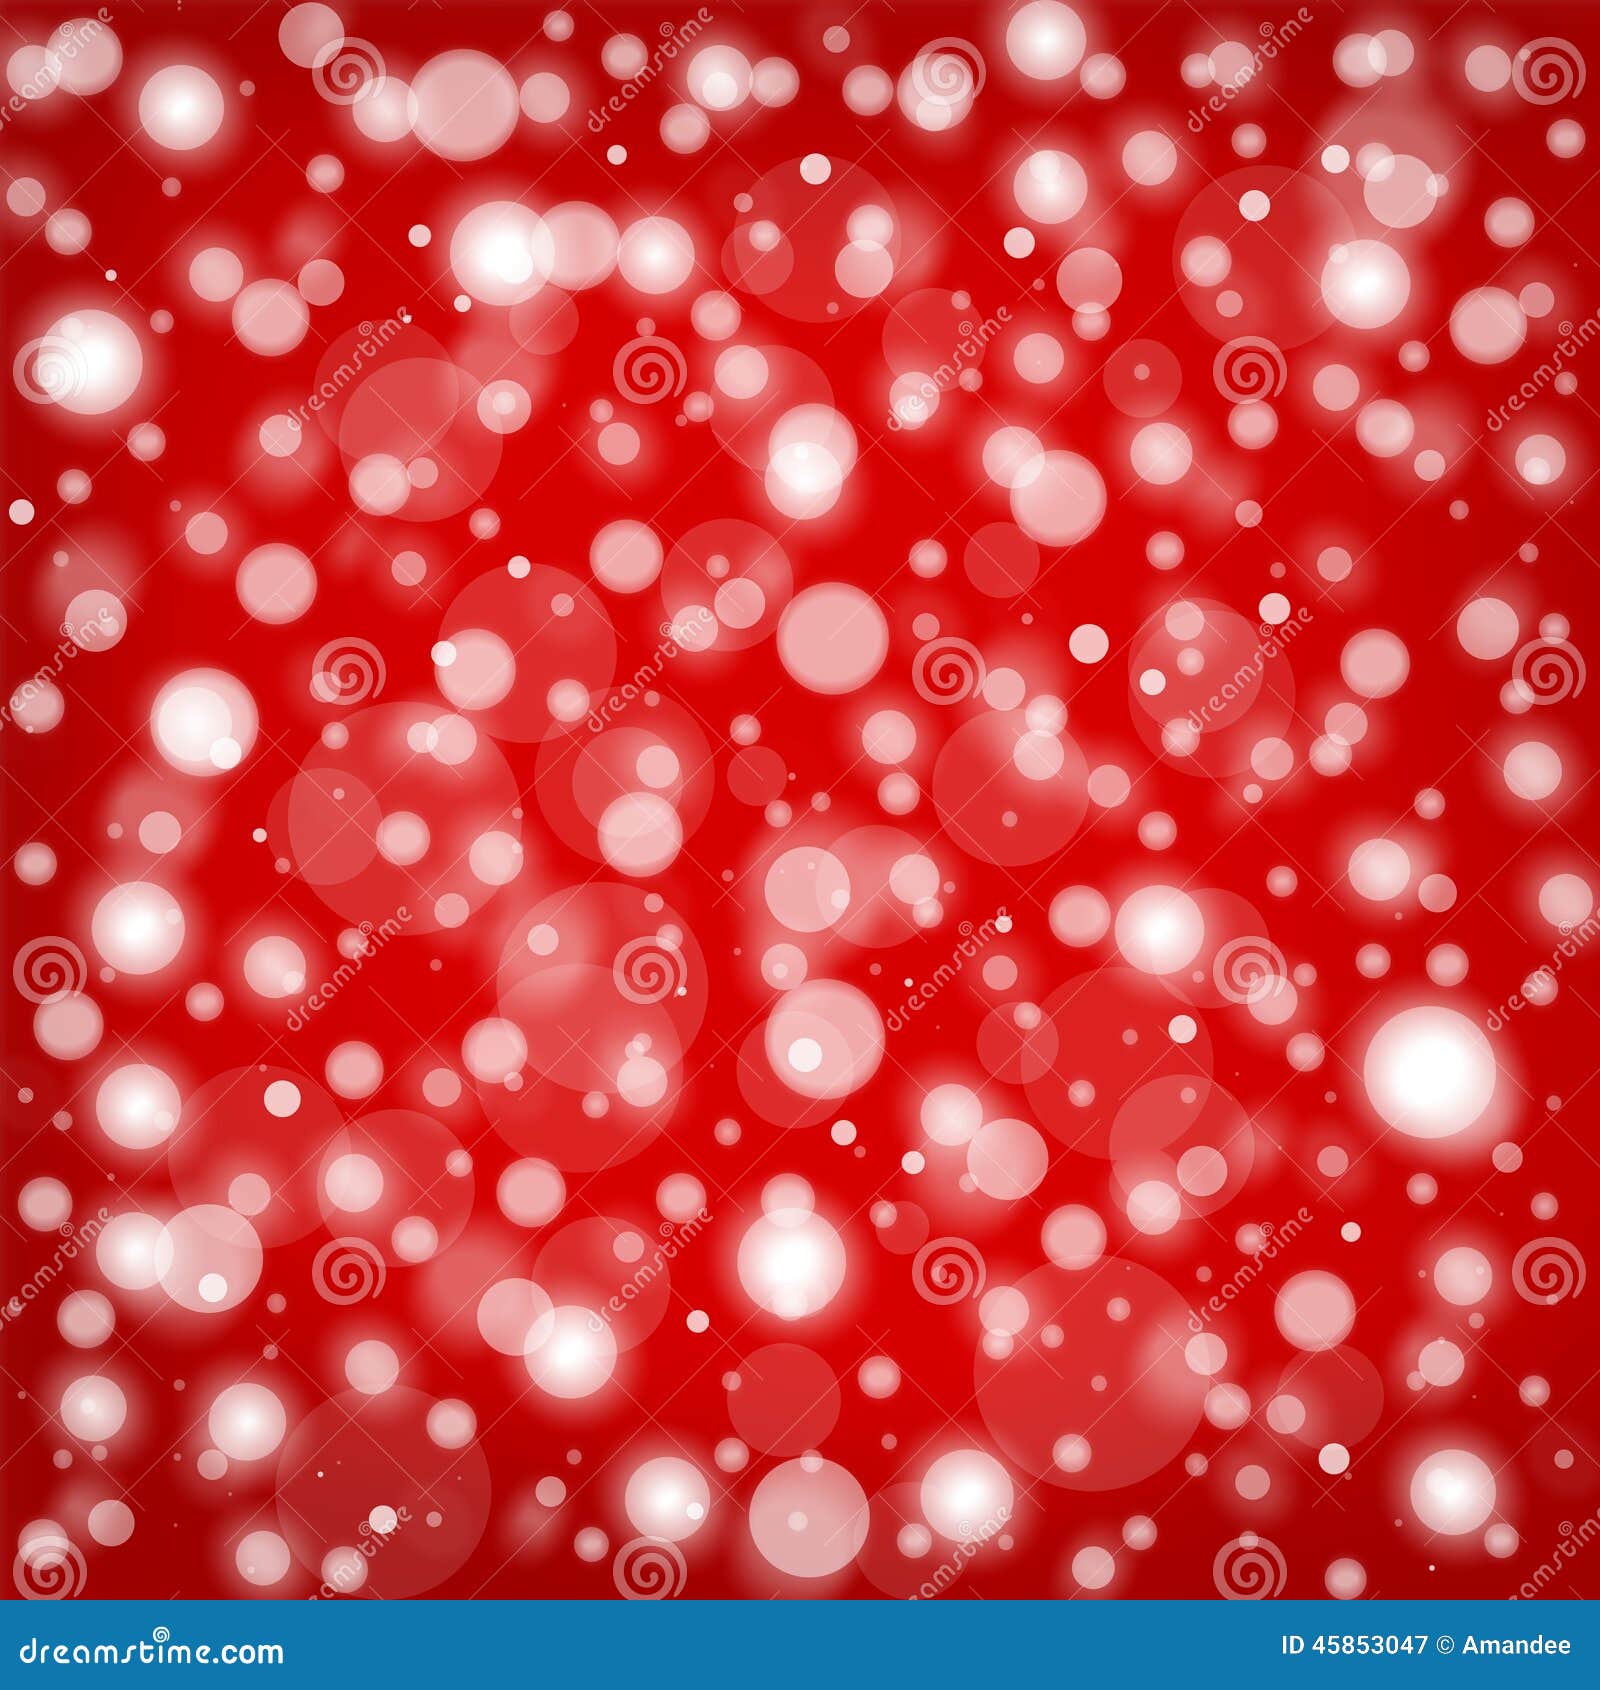 Red Background With White Falling Snow Design Or Bright Blurred